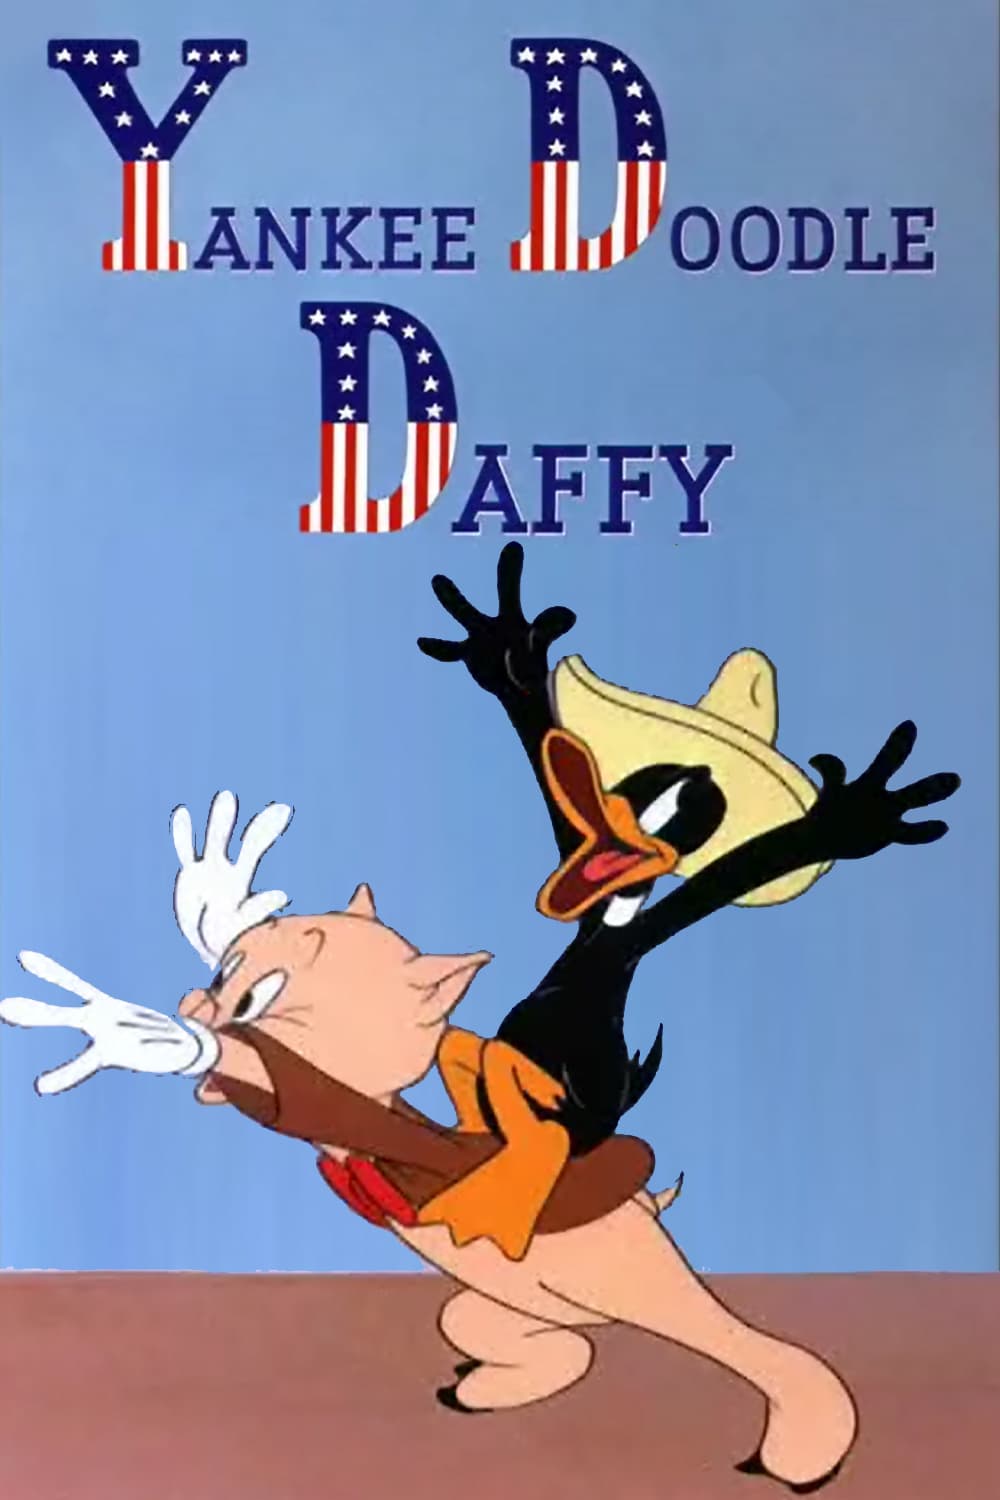 Manager Daffy